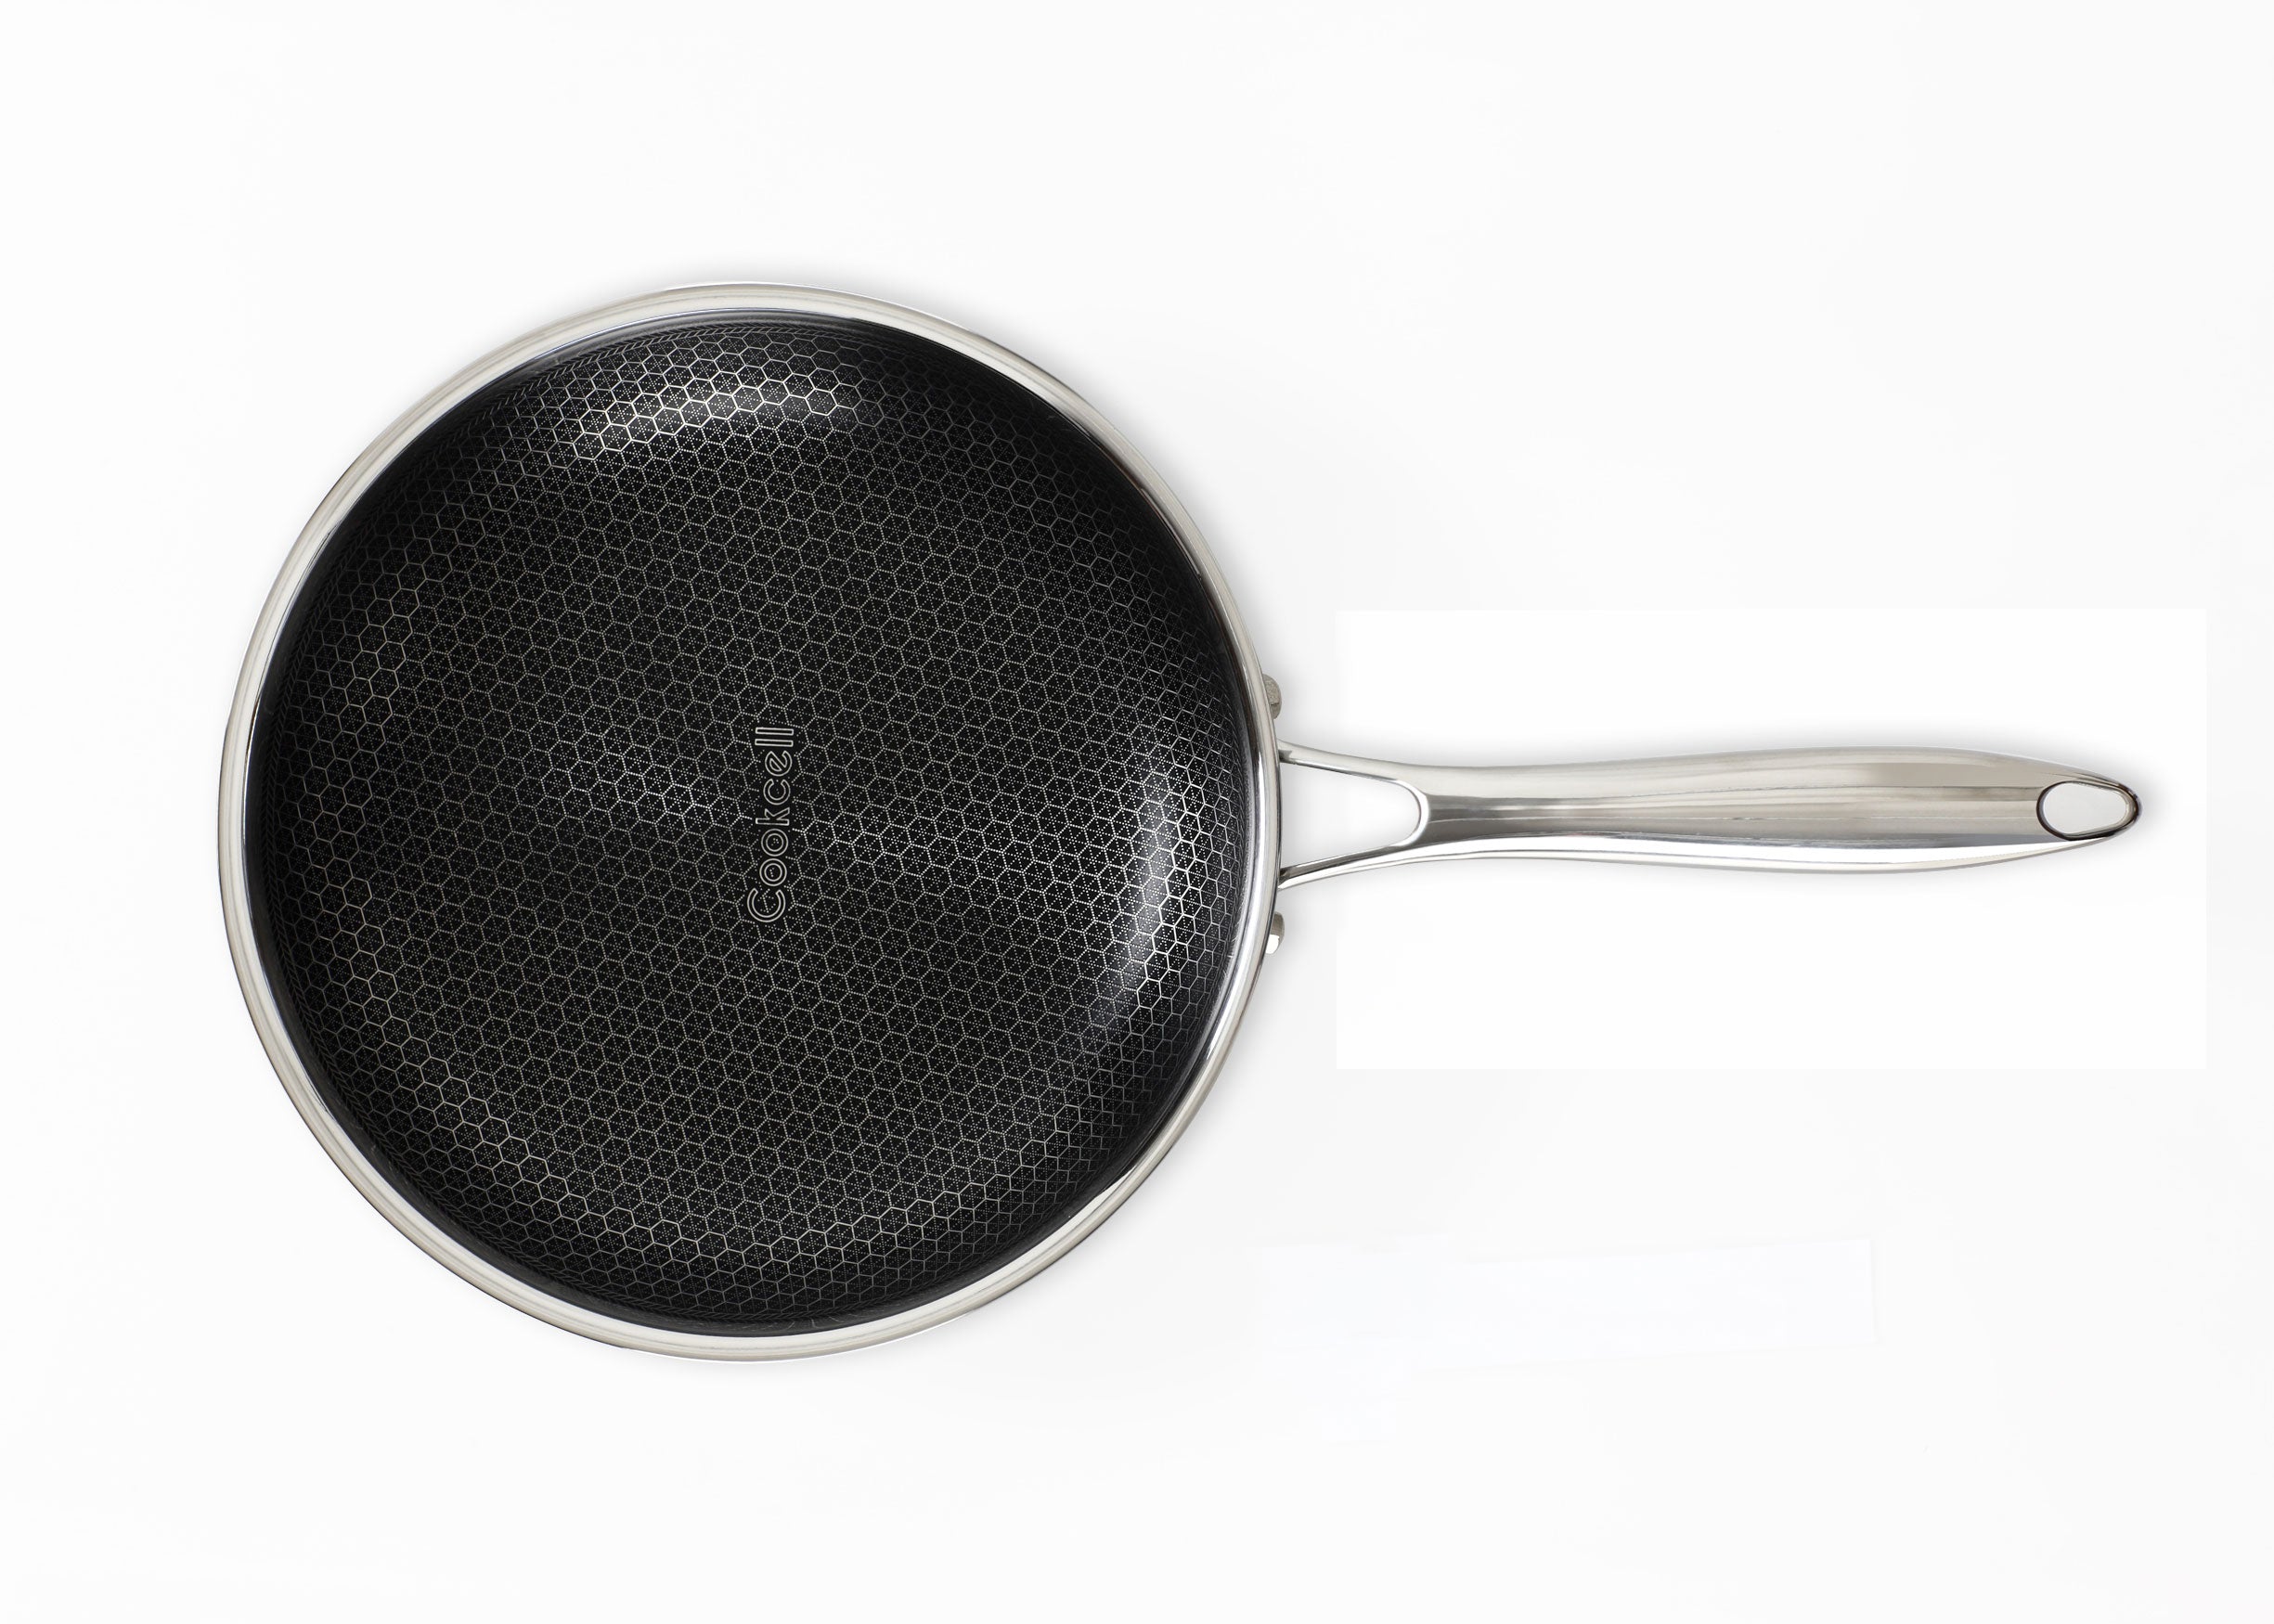 COOKCELL Stainless Steel Non-stick Hybrid Wok 32cm